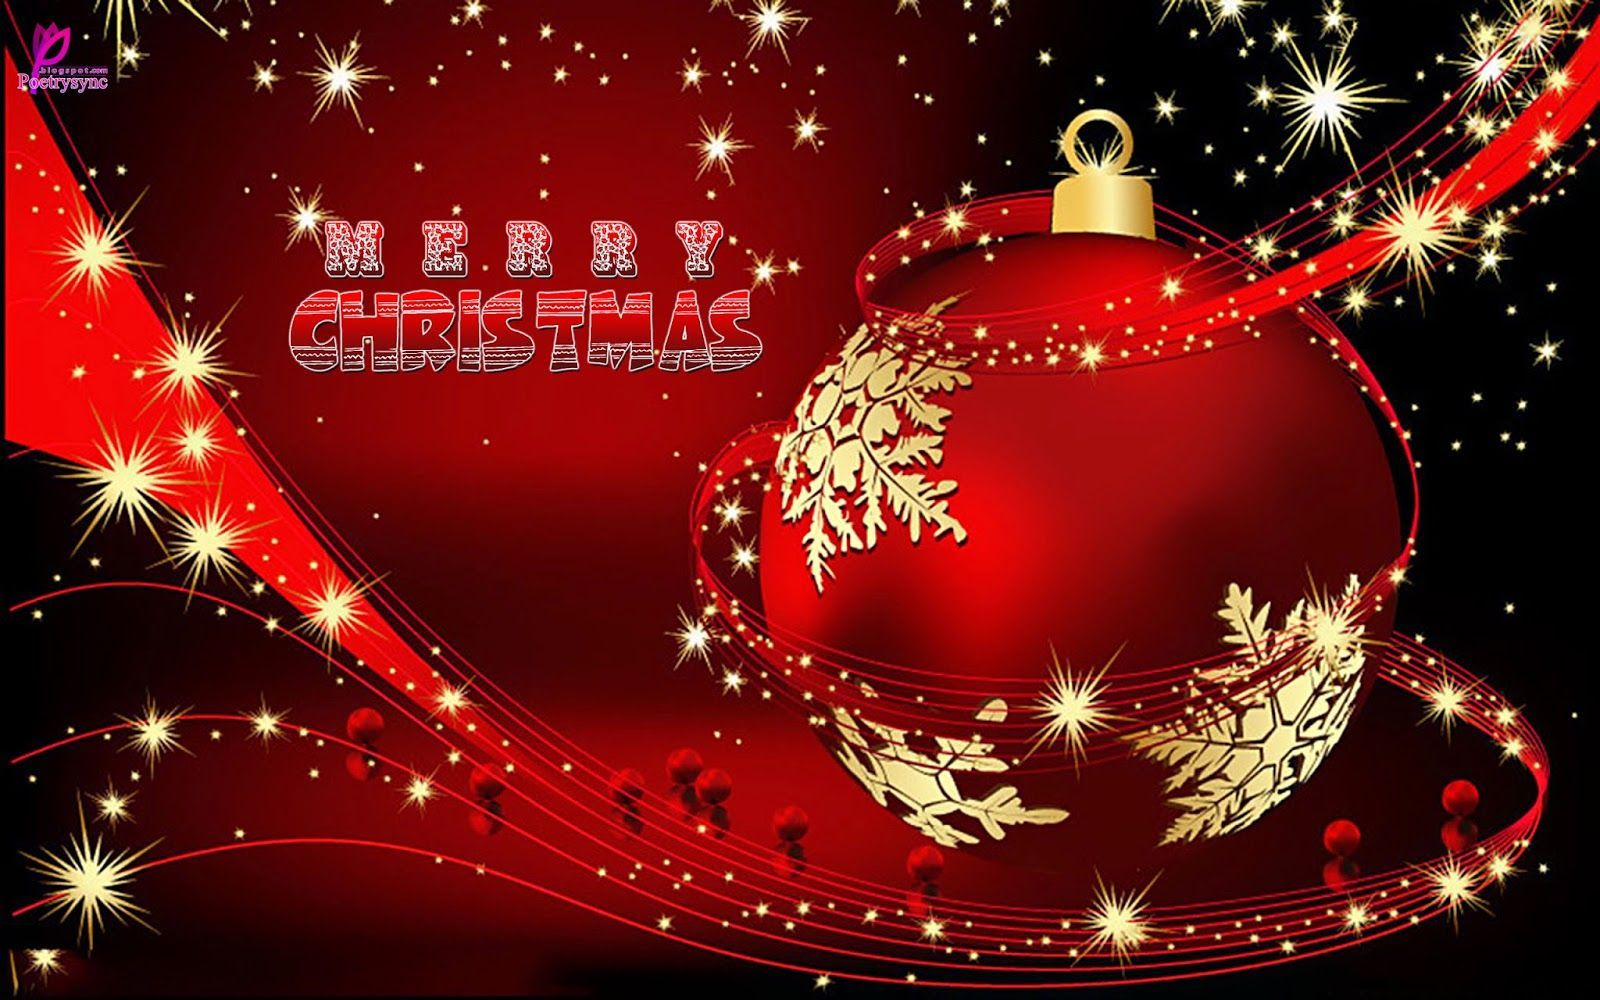 Merry Chrismast and Happy New Year: Christmas HD Wallpaper Collection